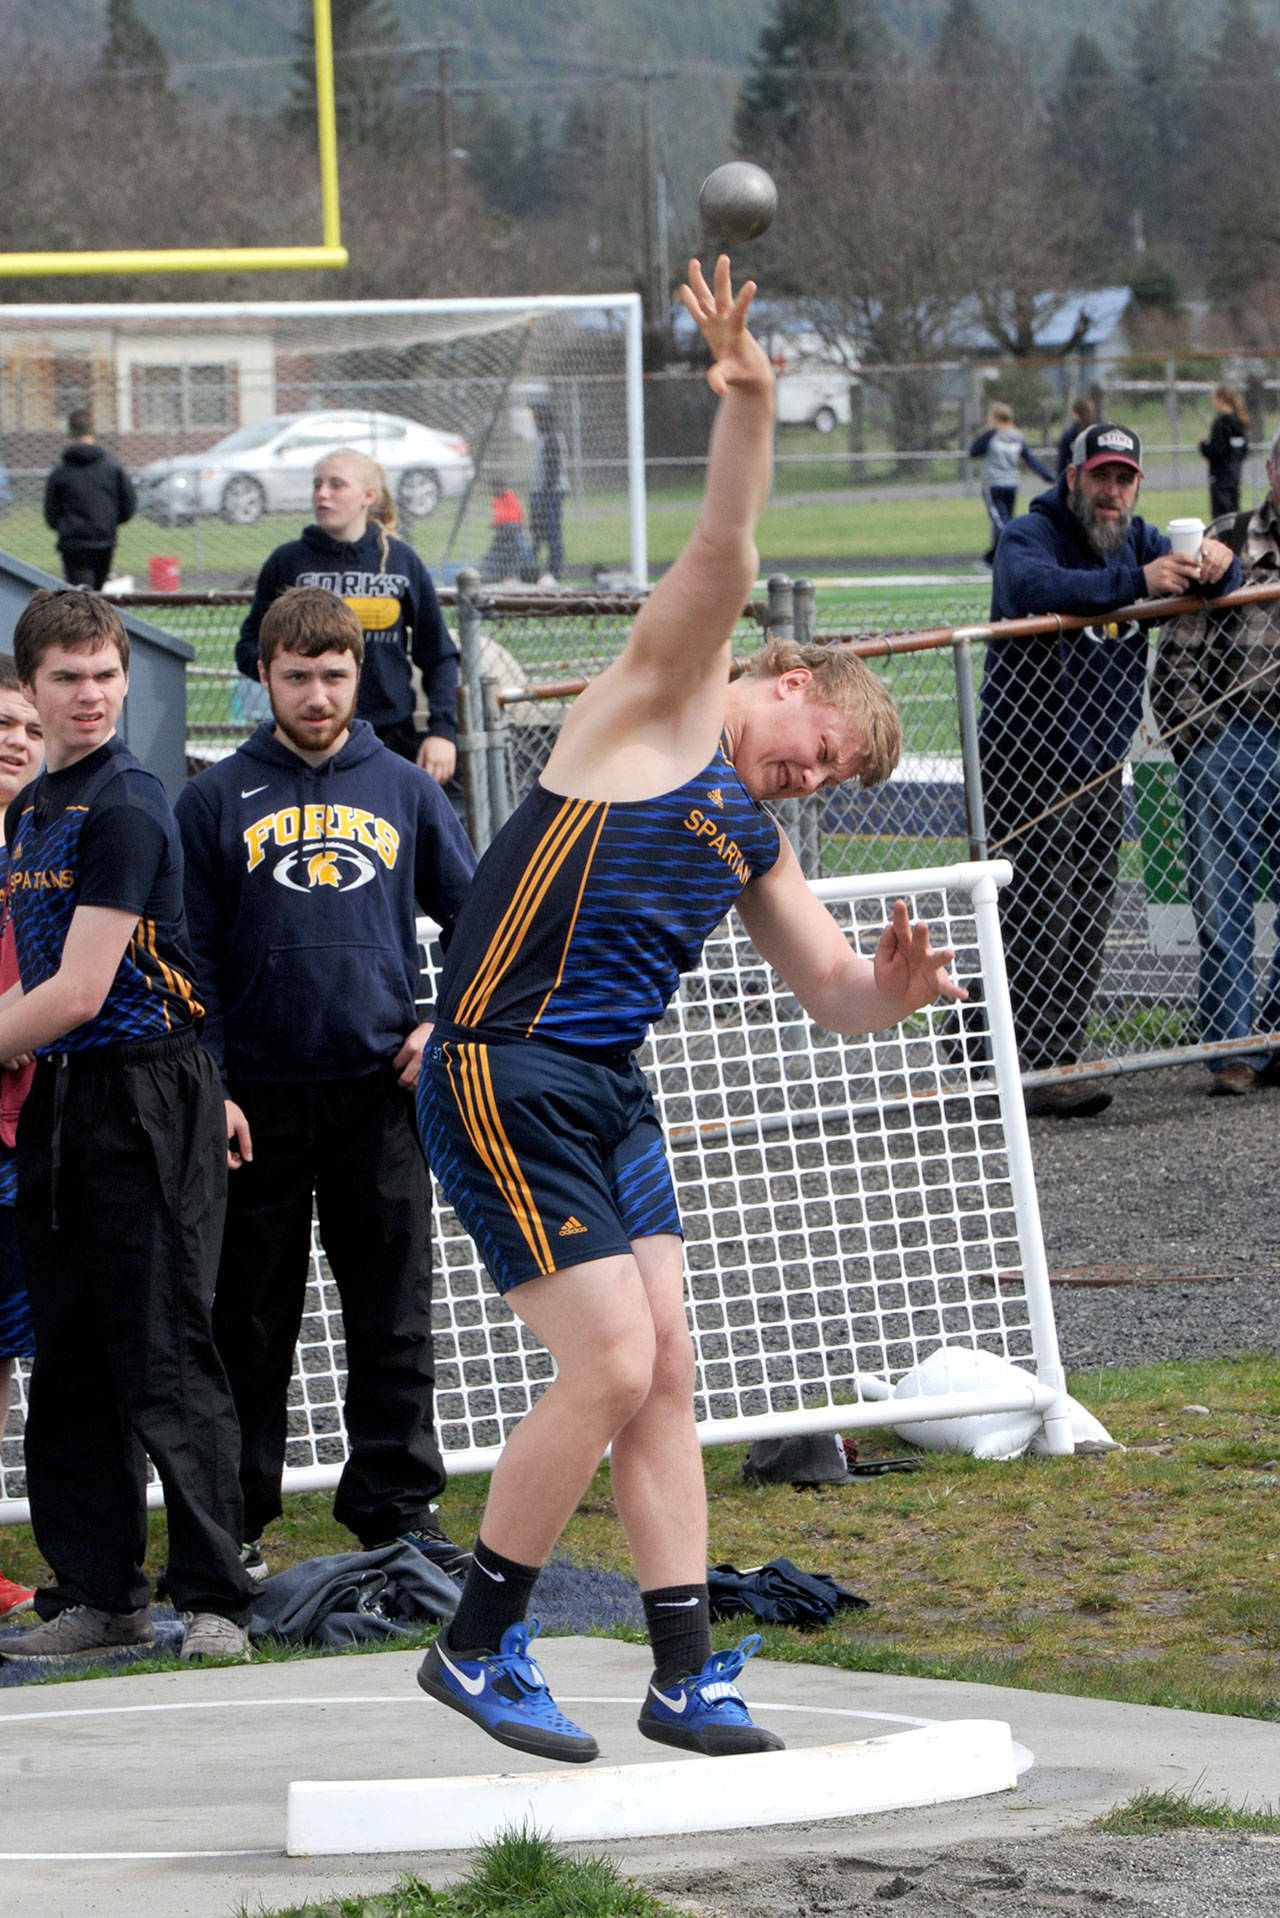 Forks’ Luke Dahlgren competes in the shot put at the Forks Lions Club Invitational in Forks on Saturday. Dahlgren won the event with a distance of 39 feet, 5 1/2 inches. (Lonnie Archibald/for Peninsula Daily News)